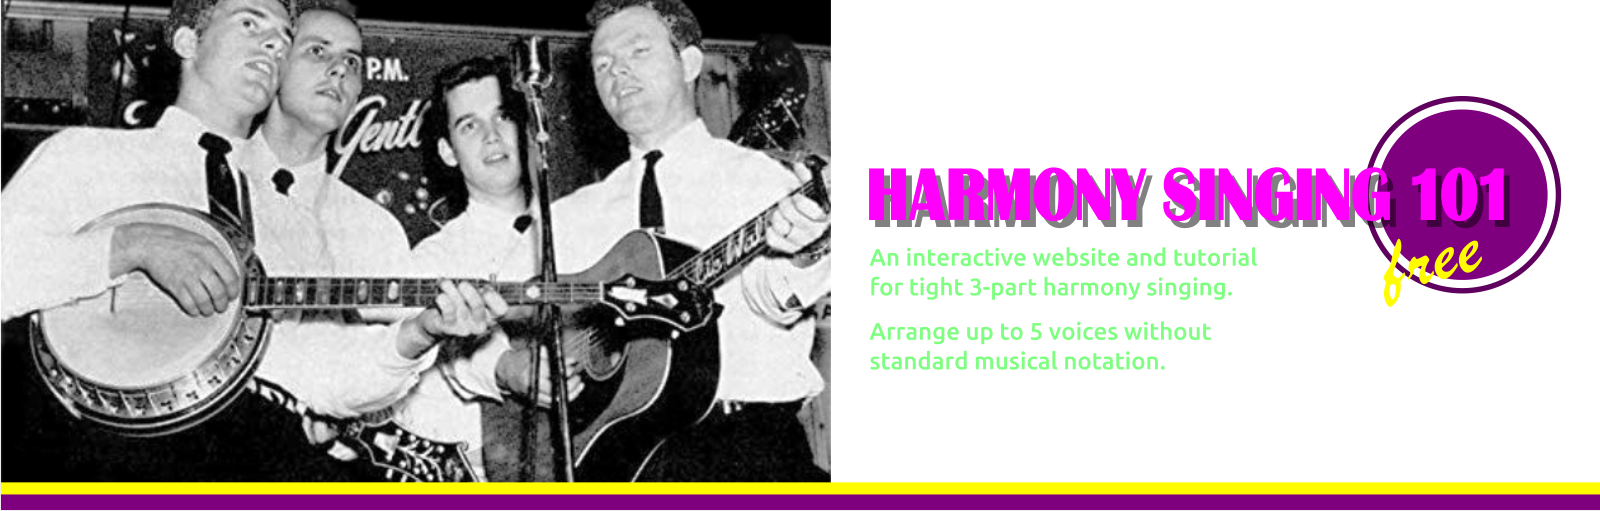 header showing a photo of the Country Gentlemen of the 60s, and the title of the website, Harmony Singing one-o-one